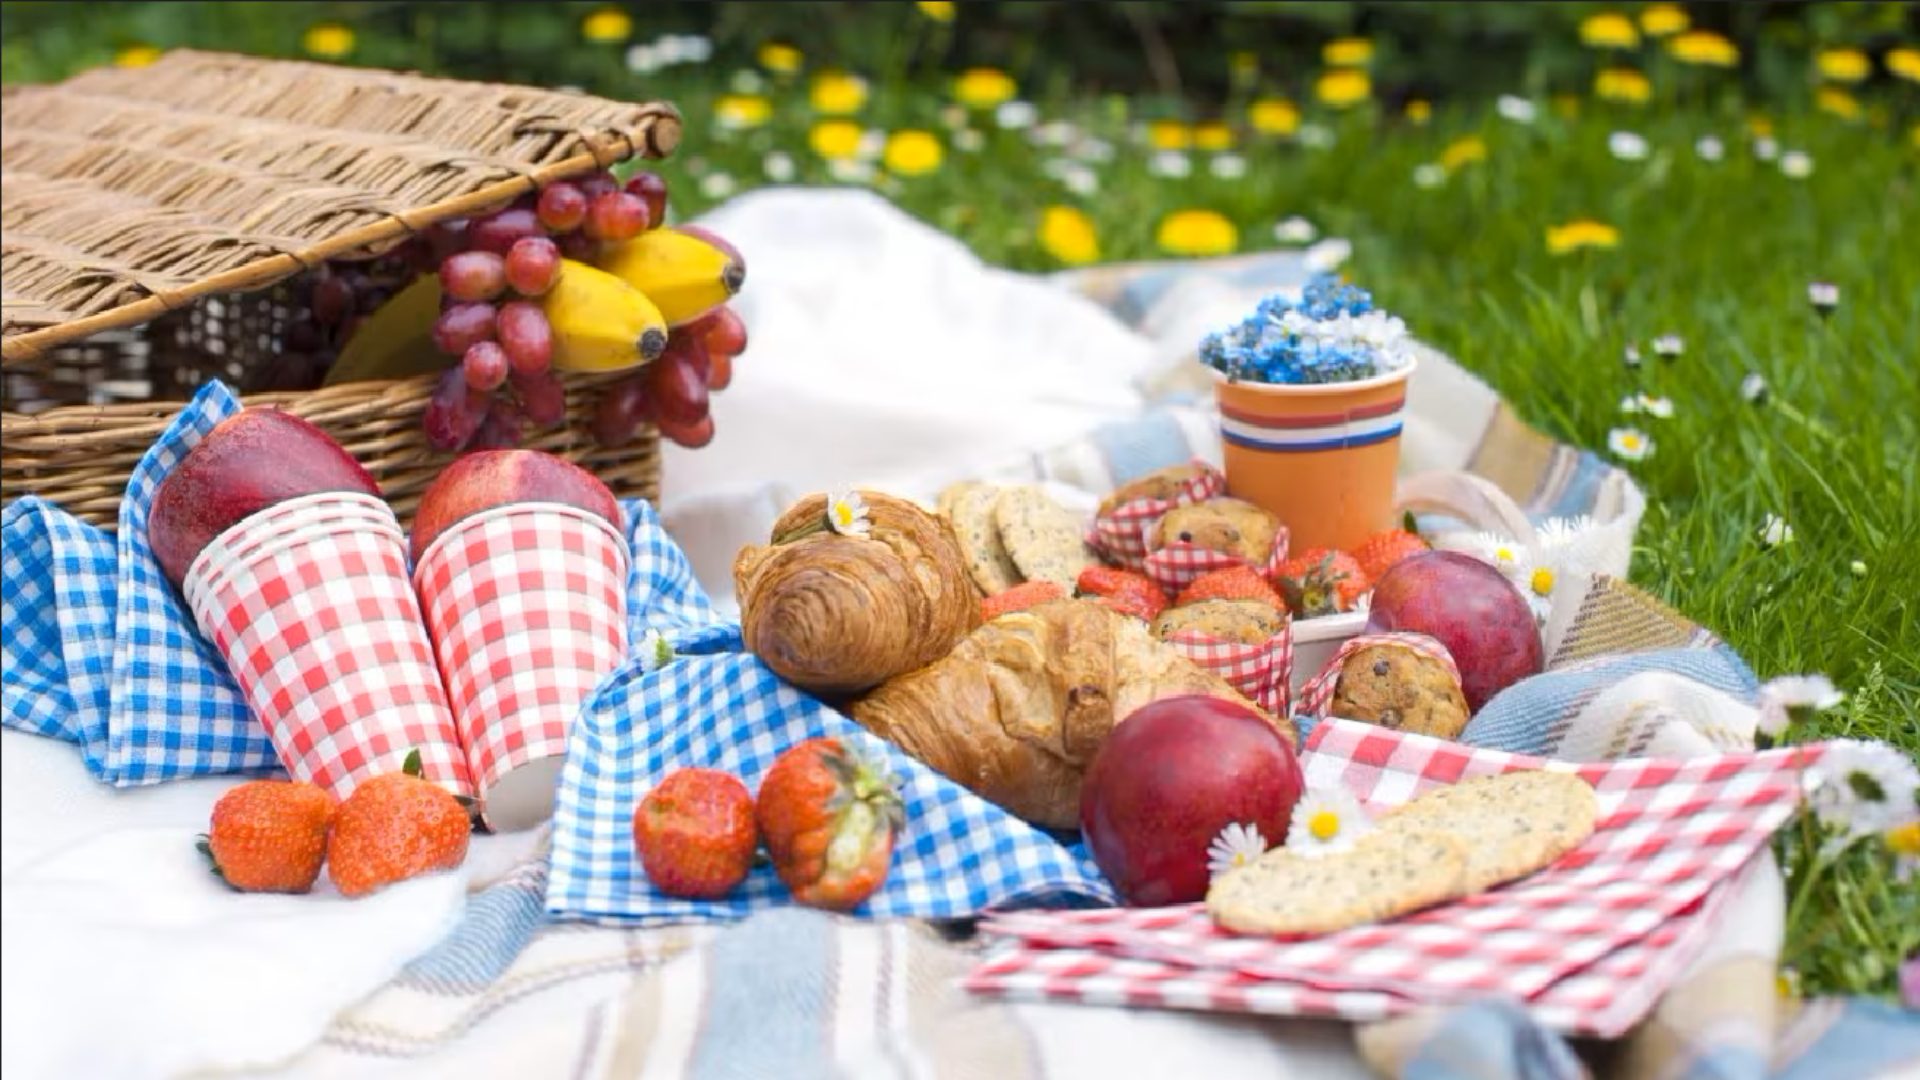 Picnic in the Park: Relaxing and Bonding with Loved Ones